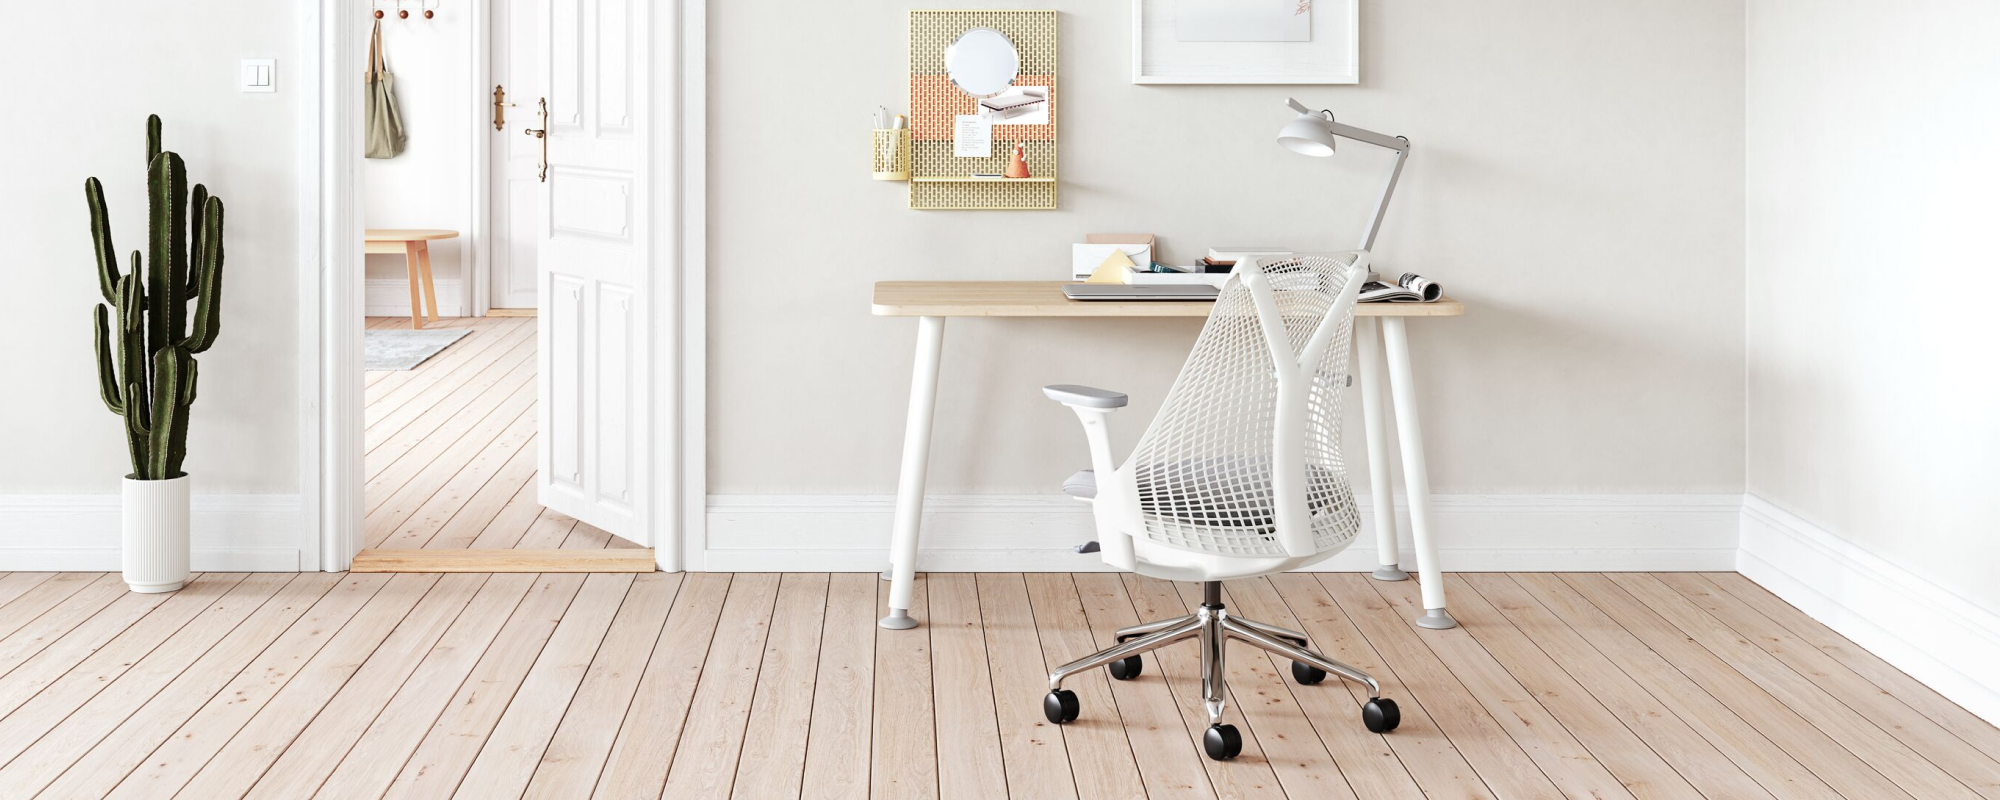 A light home office environment featuring a White Sayl Chair with polished base at a Halifax White Oak Memo Desk with a Formwork Paper Tray ontop